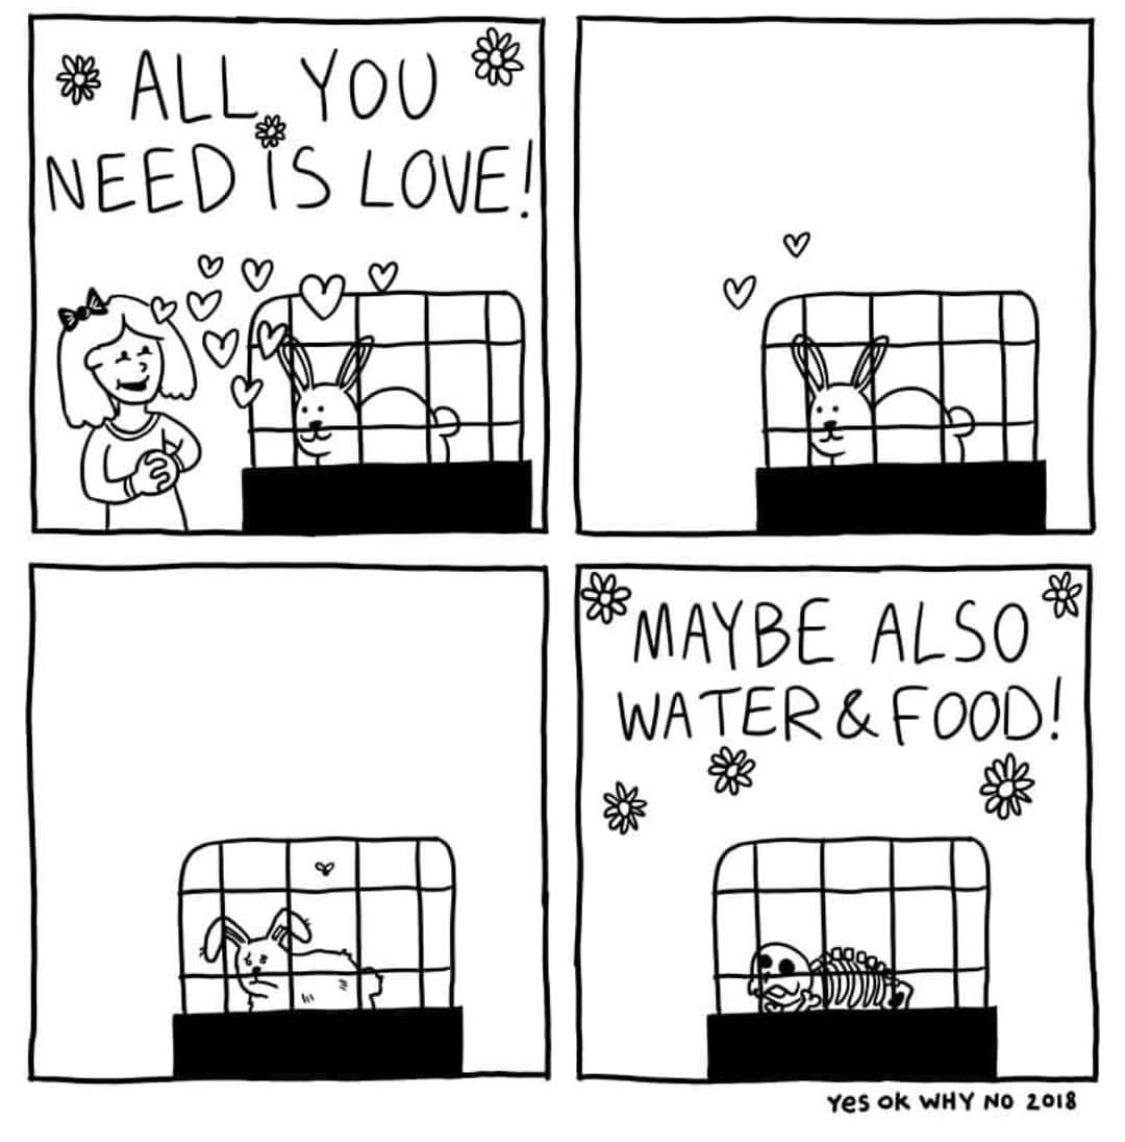 All You Need Is Love!… Maybe Also Water and Food, by Suzie Leigh